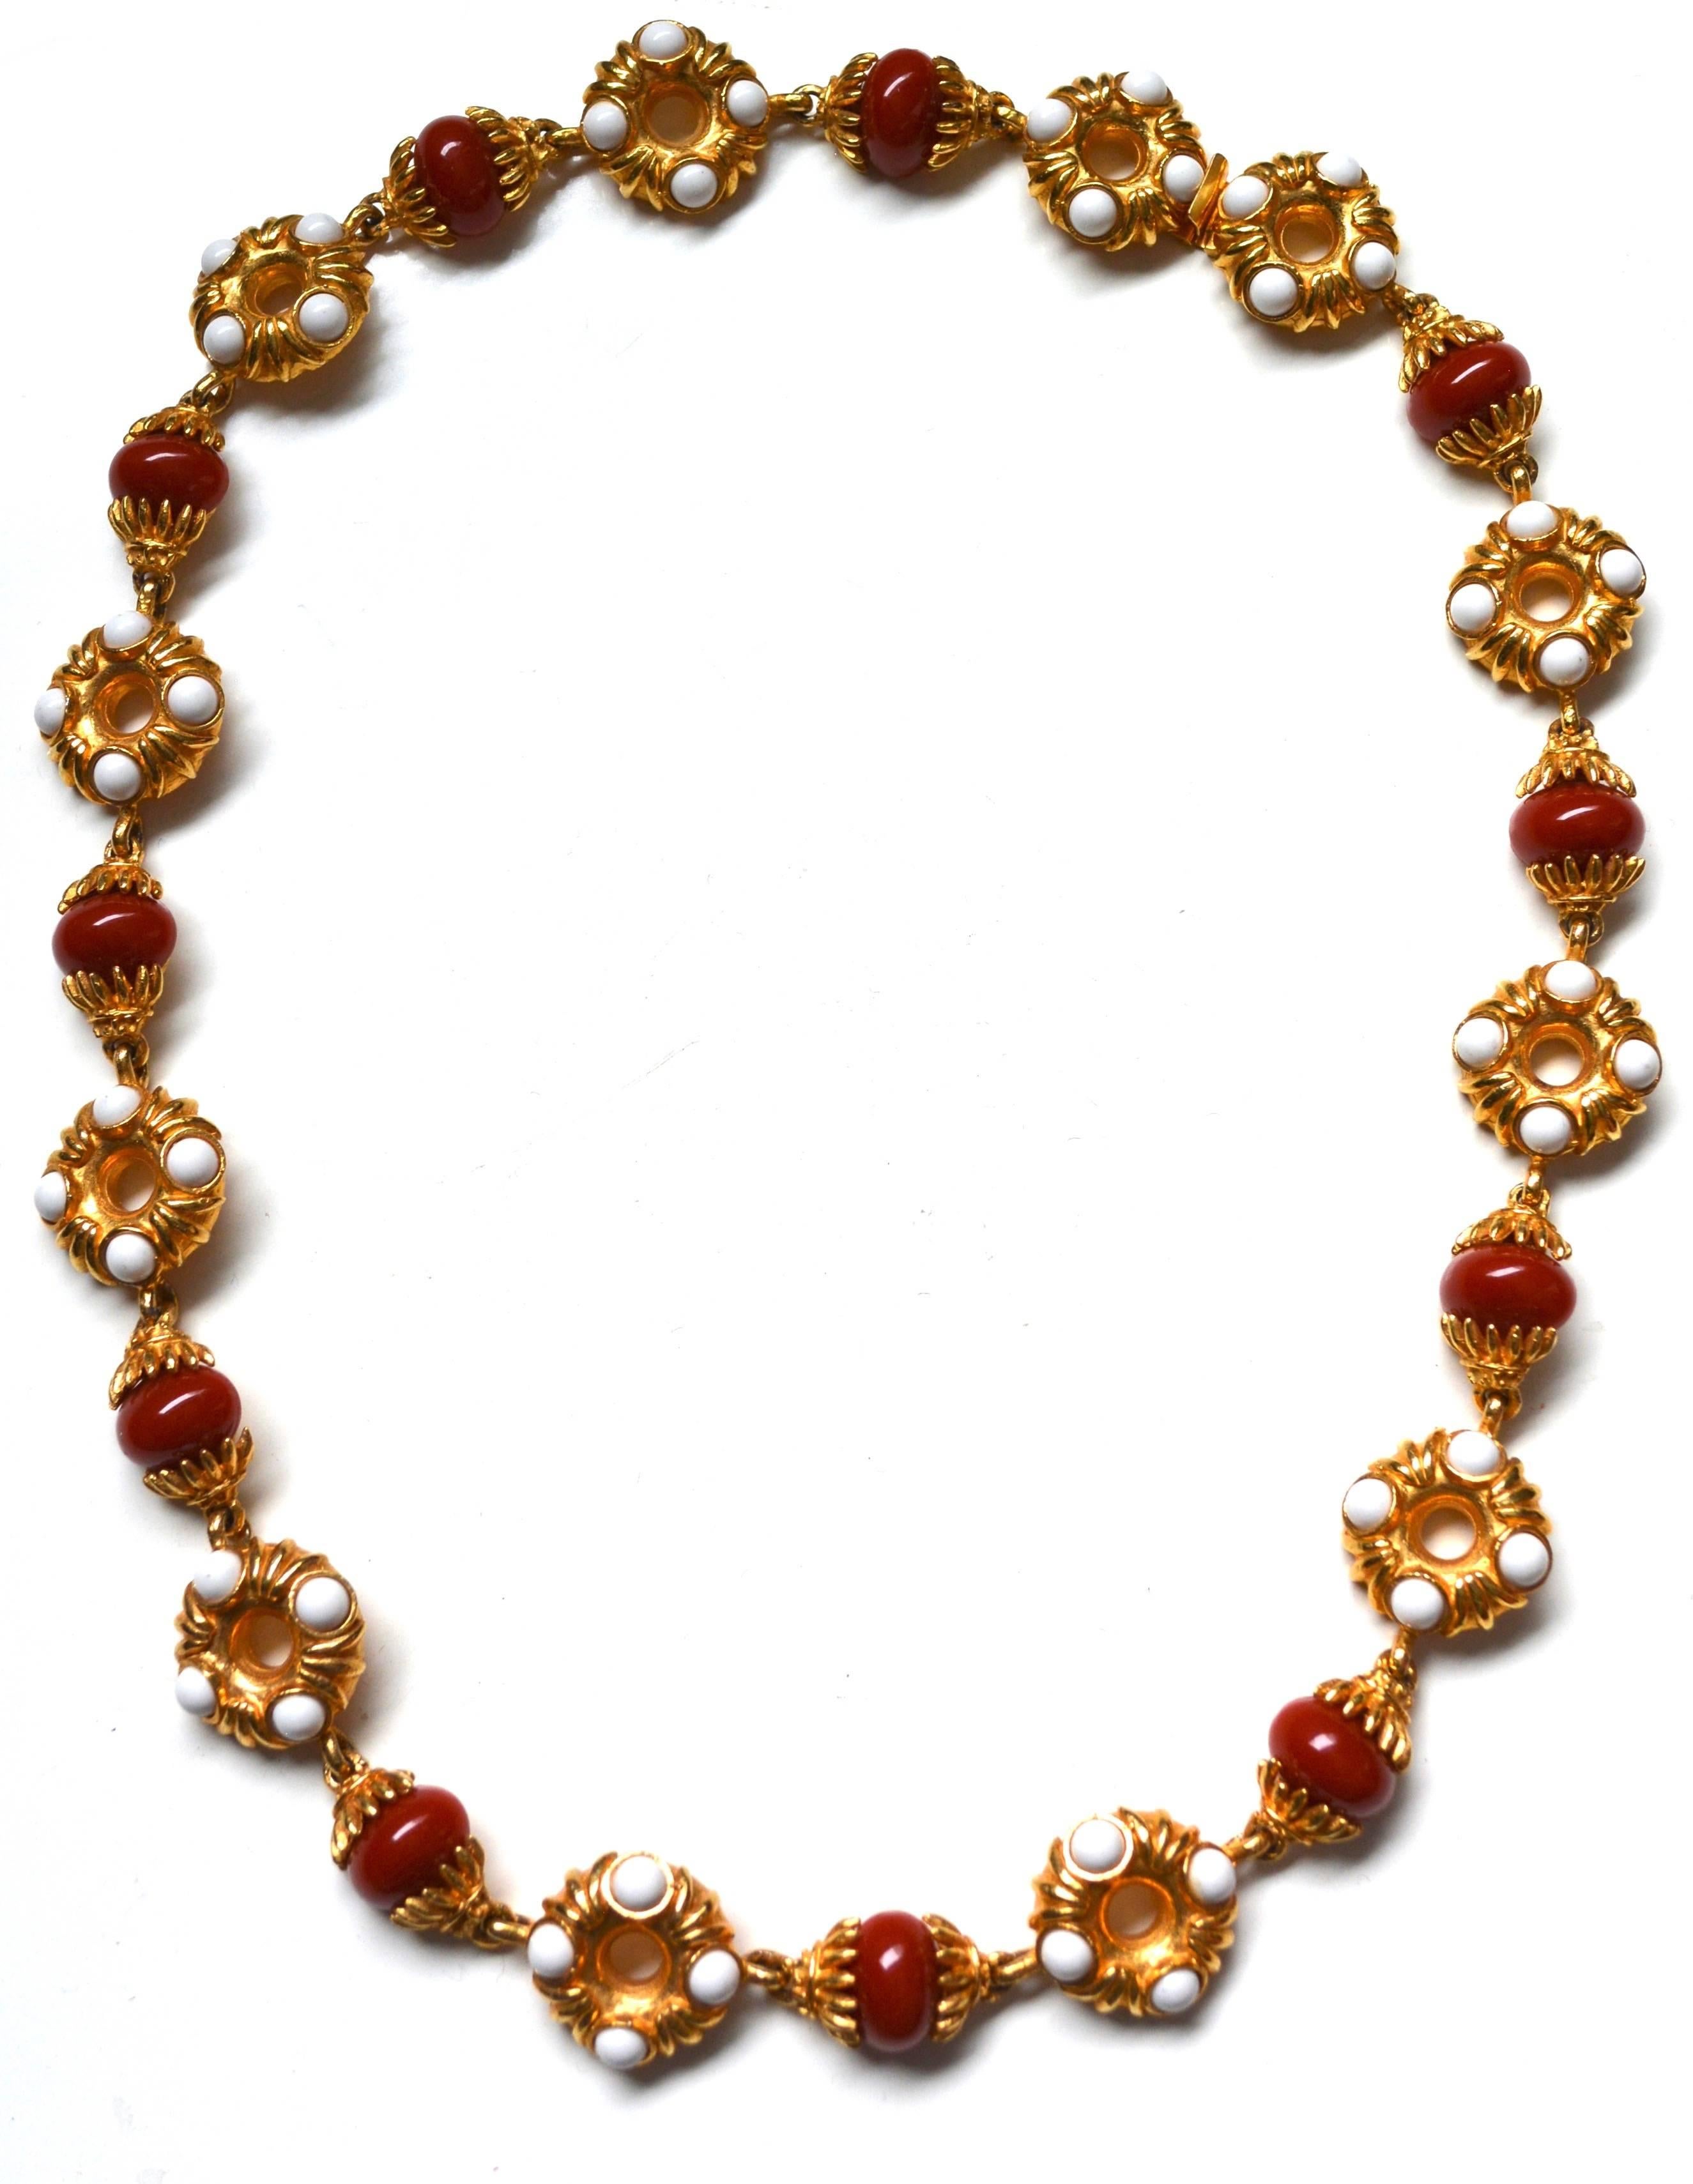 Chunky but very wearable signed KJL Etruscan style necklace with a large c indicating a 1970s date. Width varies.